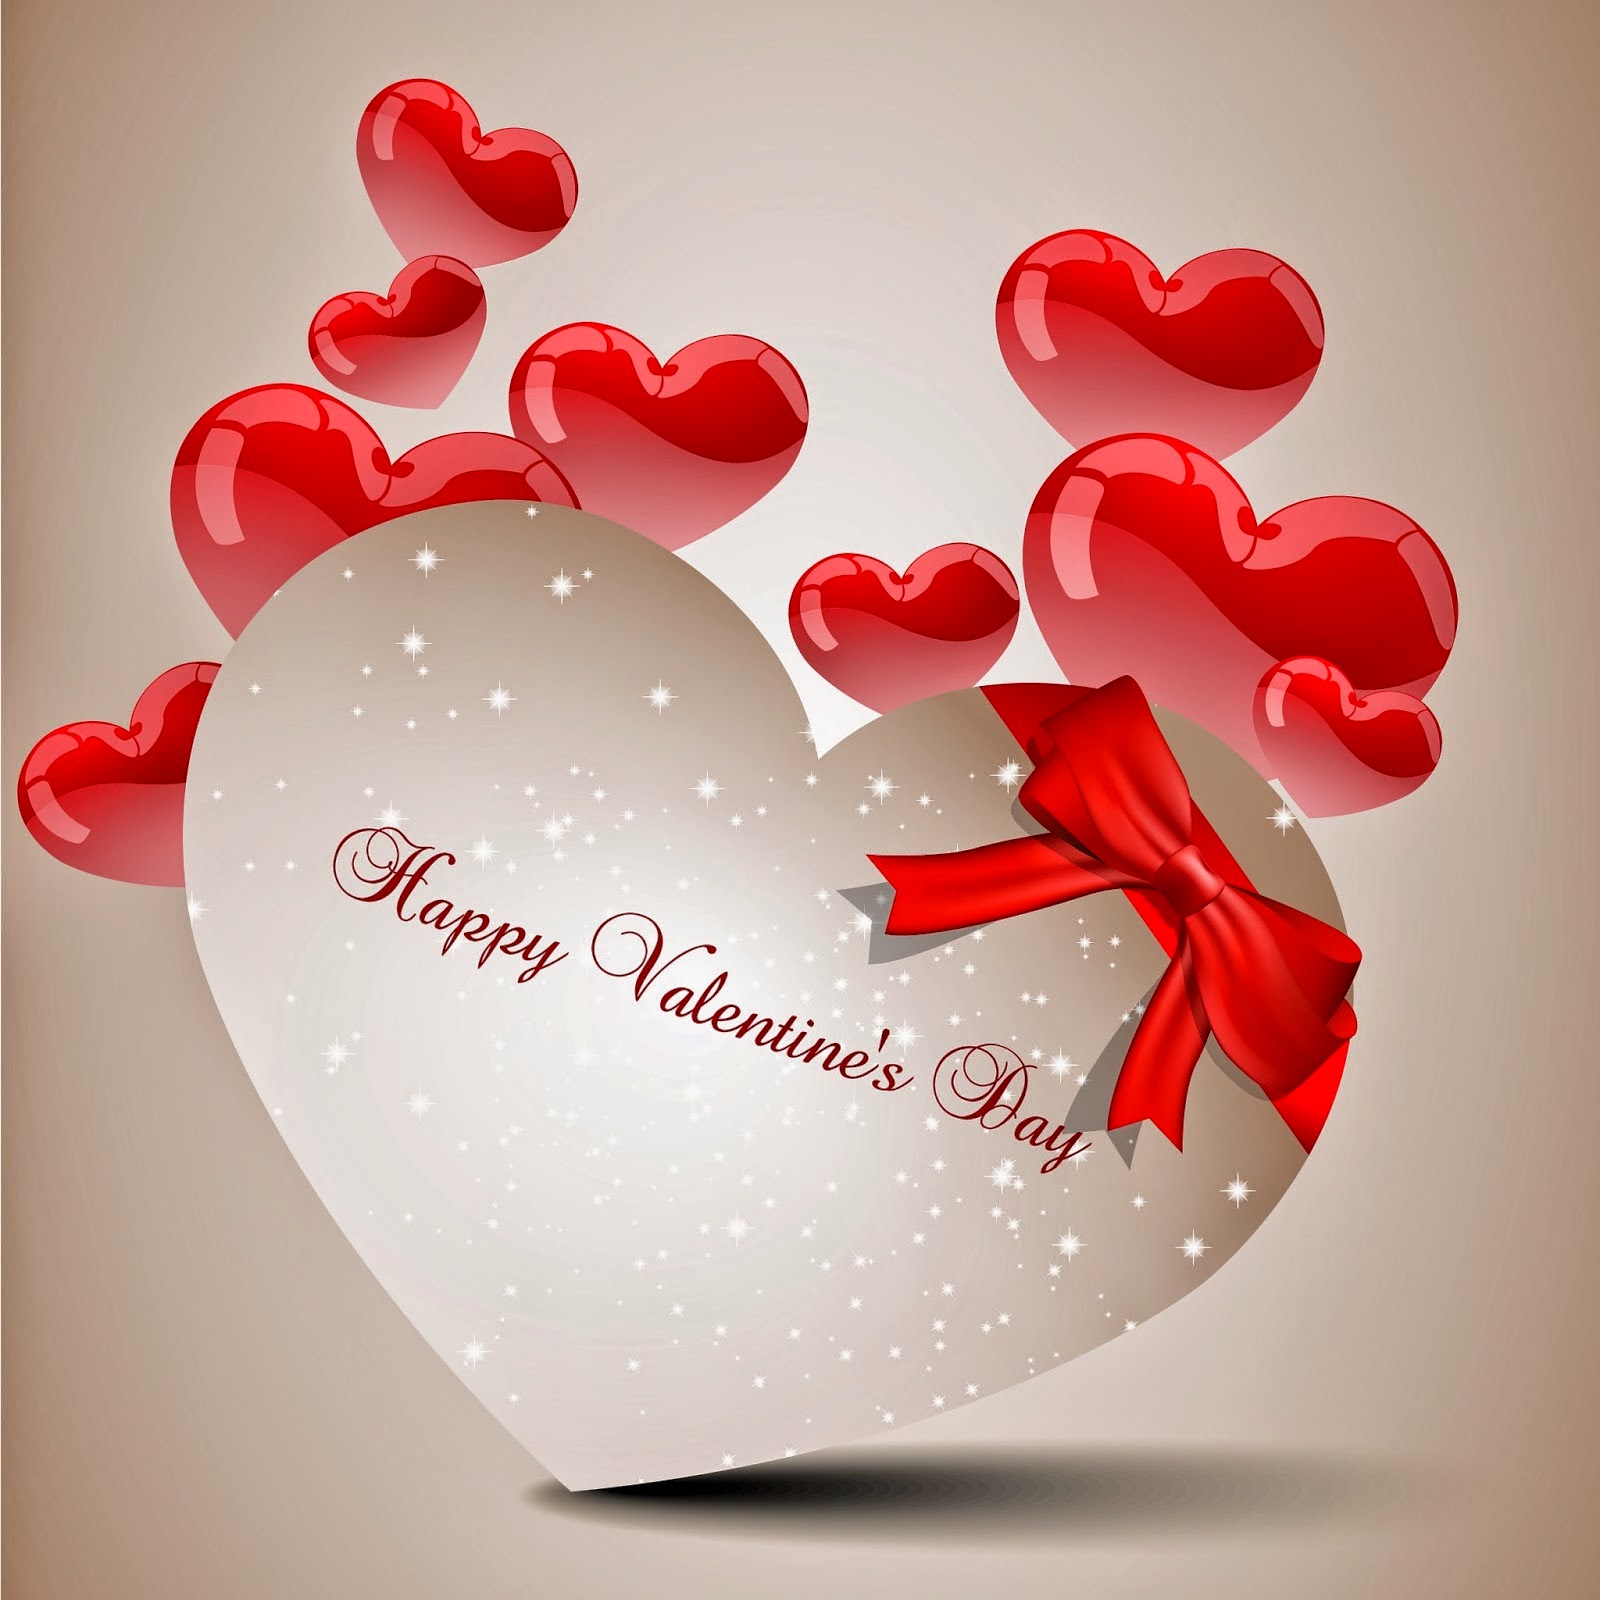 Valentines Day Image For Whatsapp Dp Profile Wallpaper